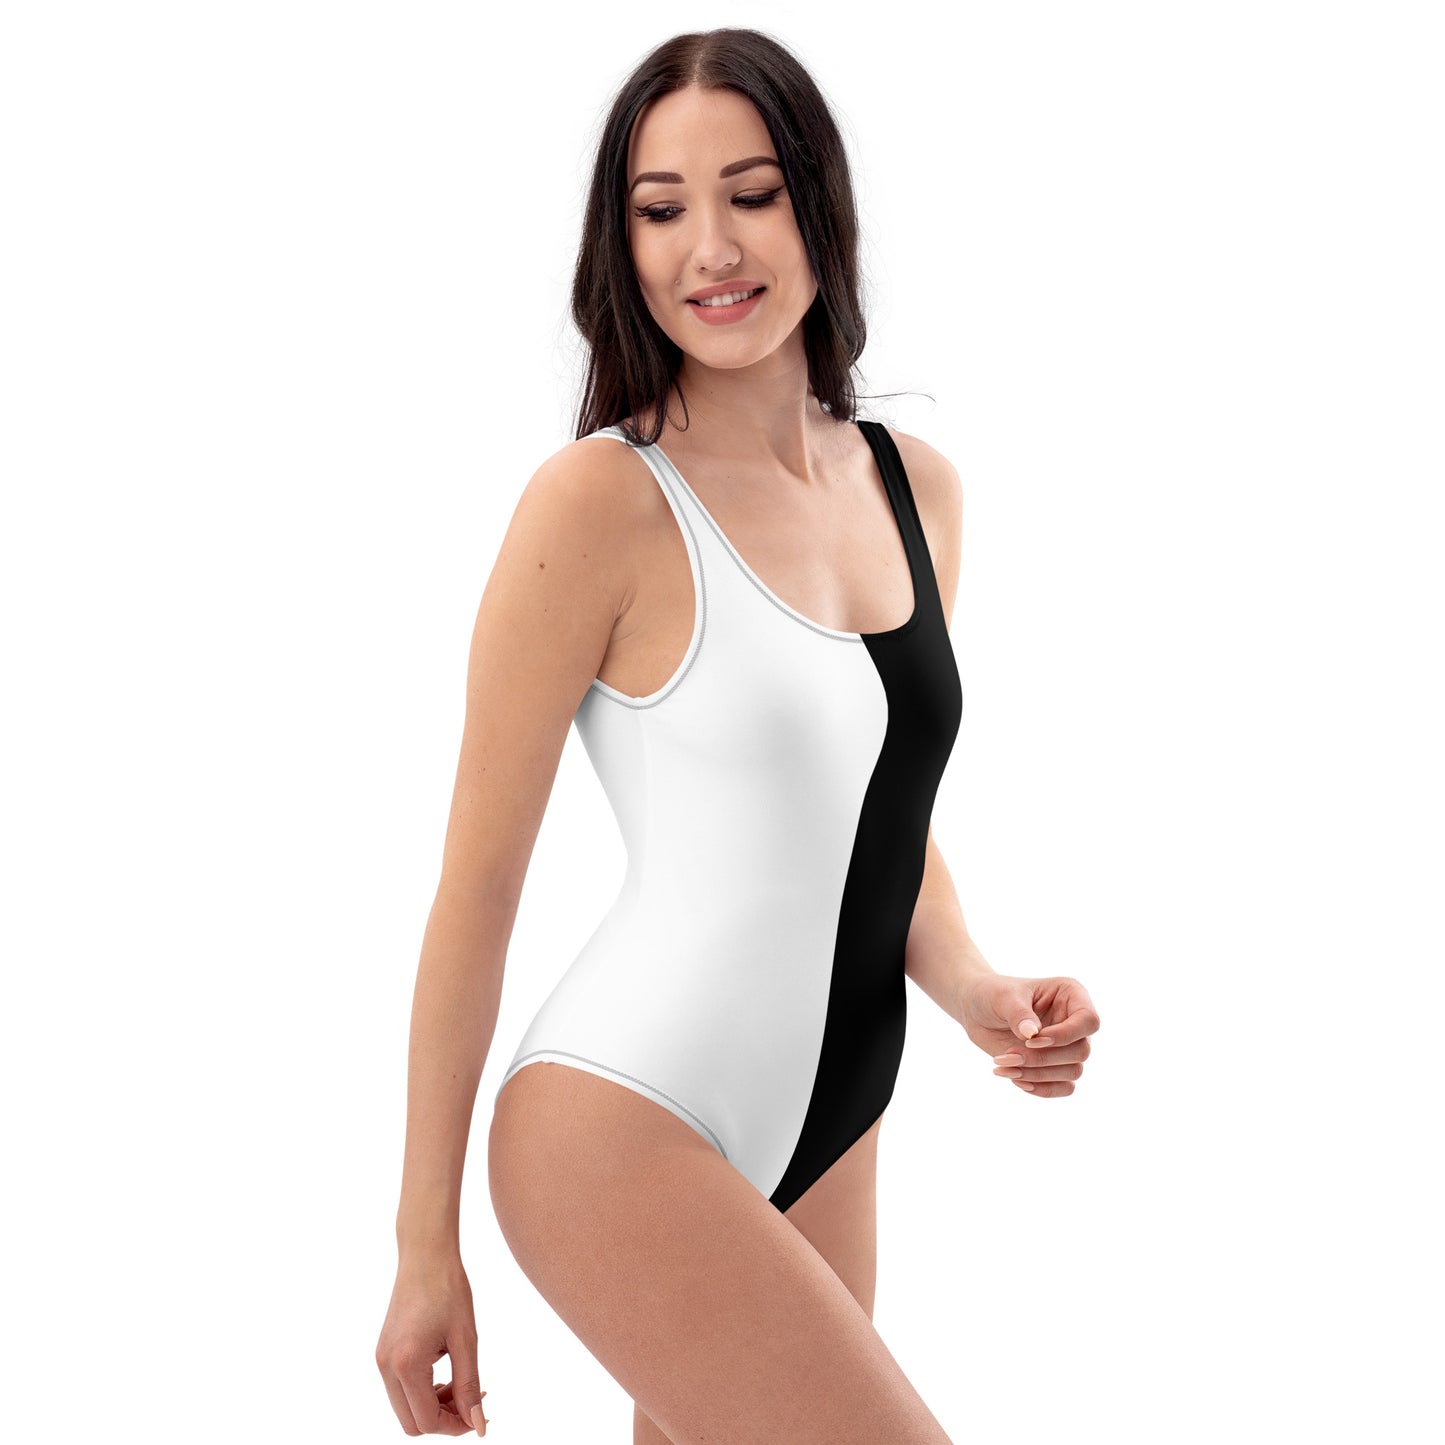 Make a Statement with Our Elegant Black and White One-Piece Swimsuit